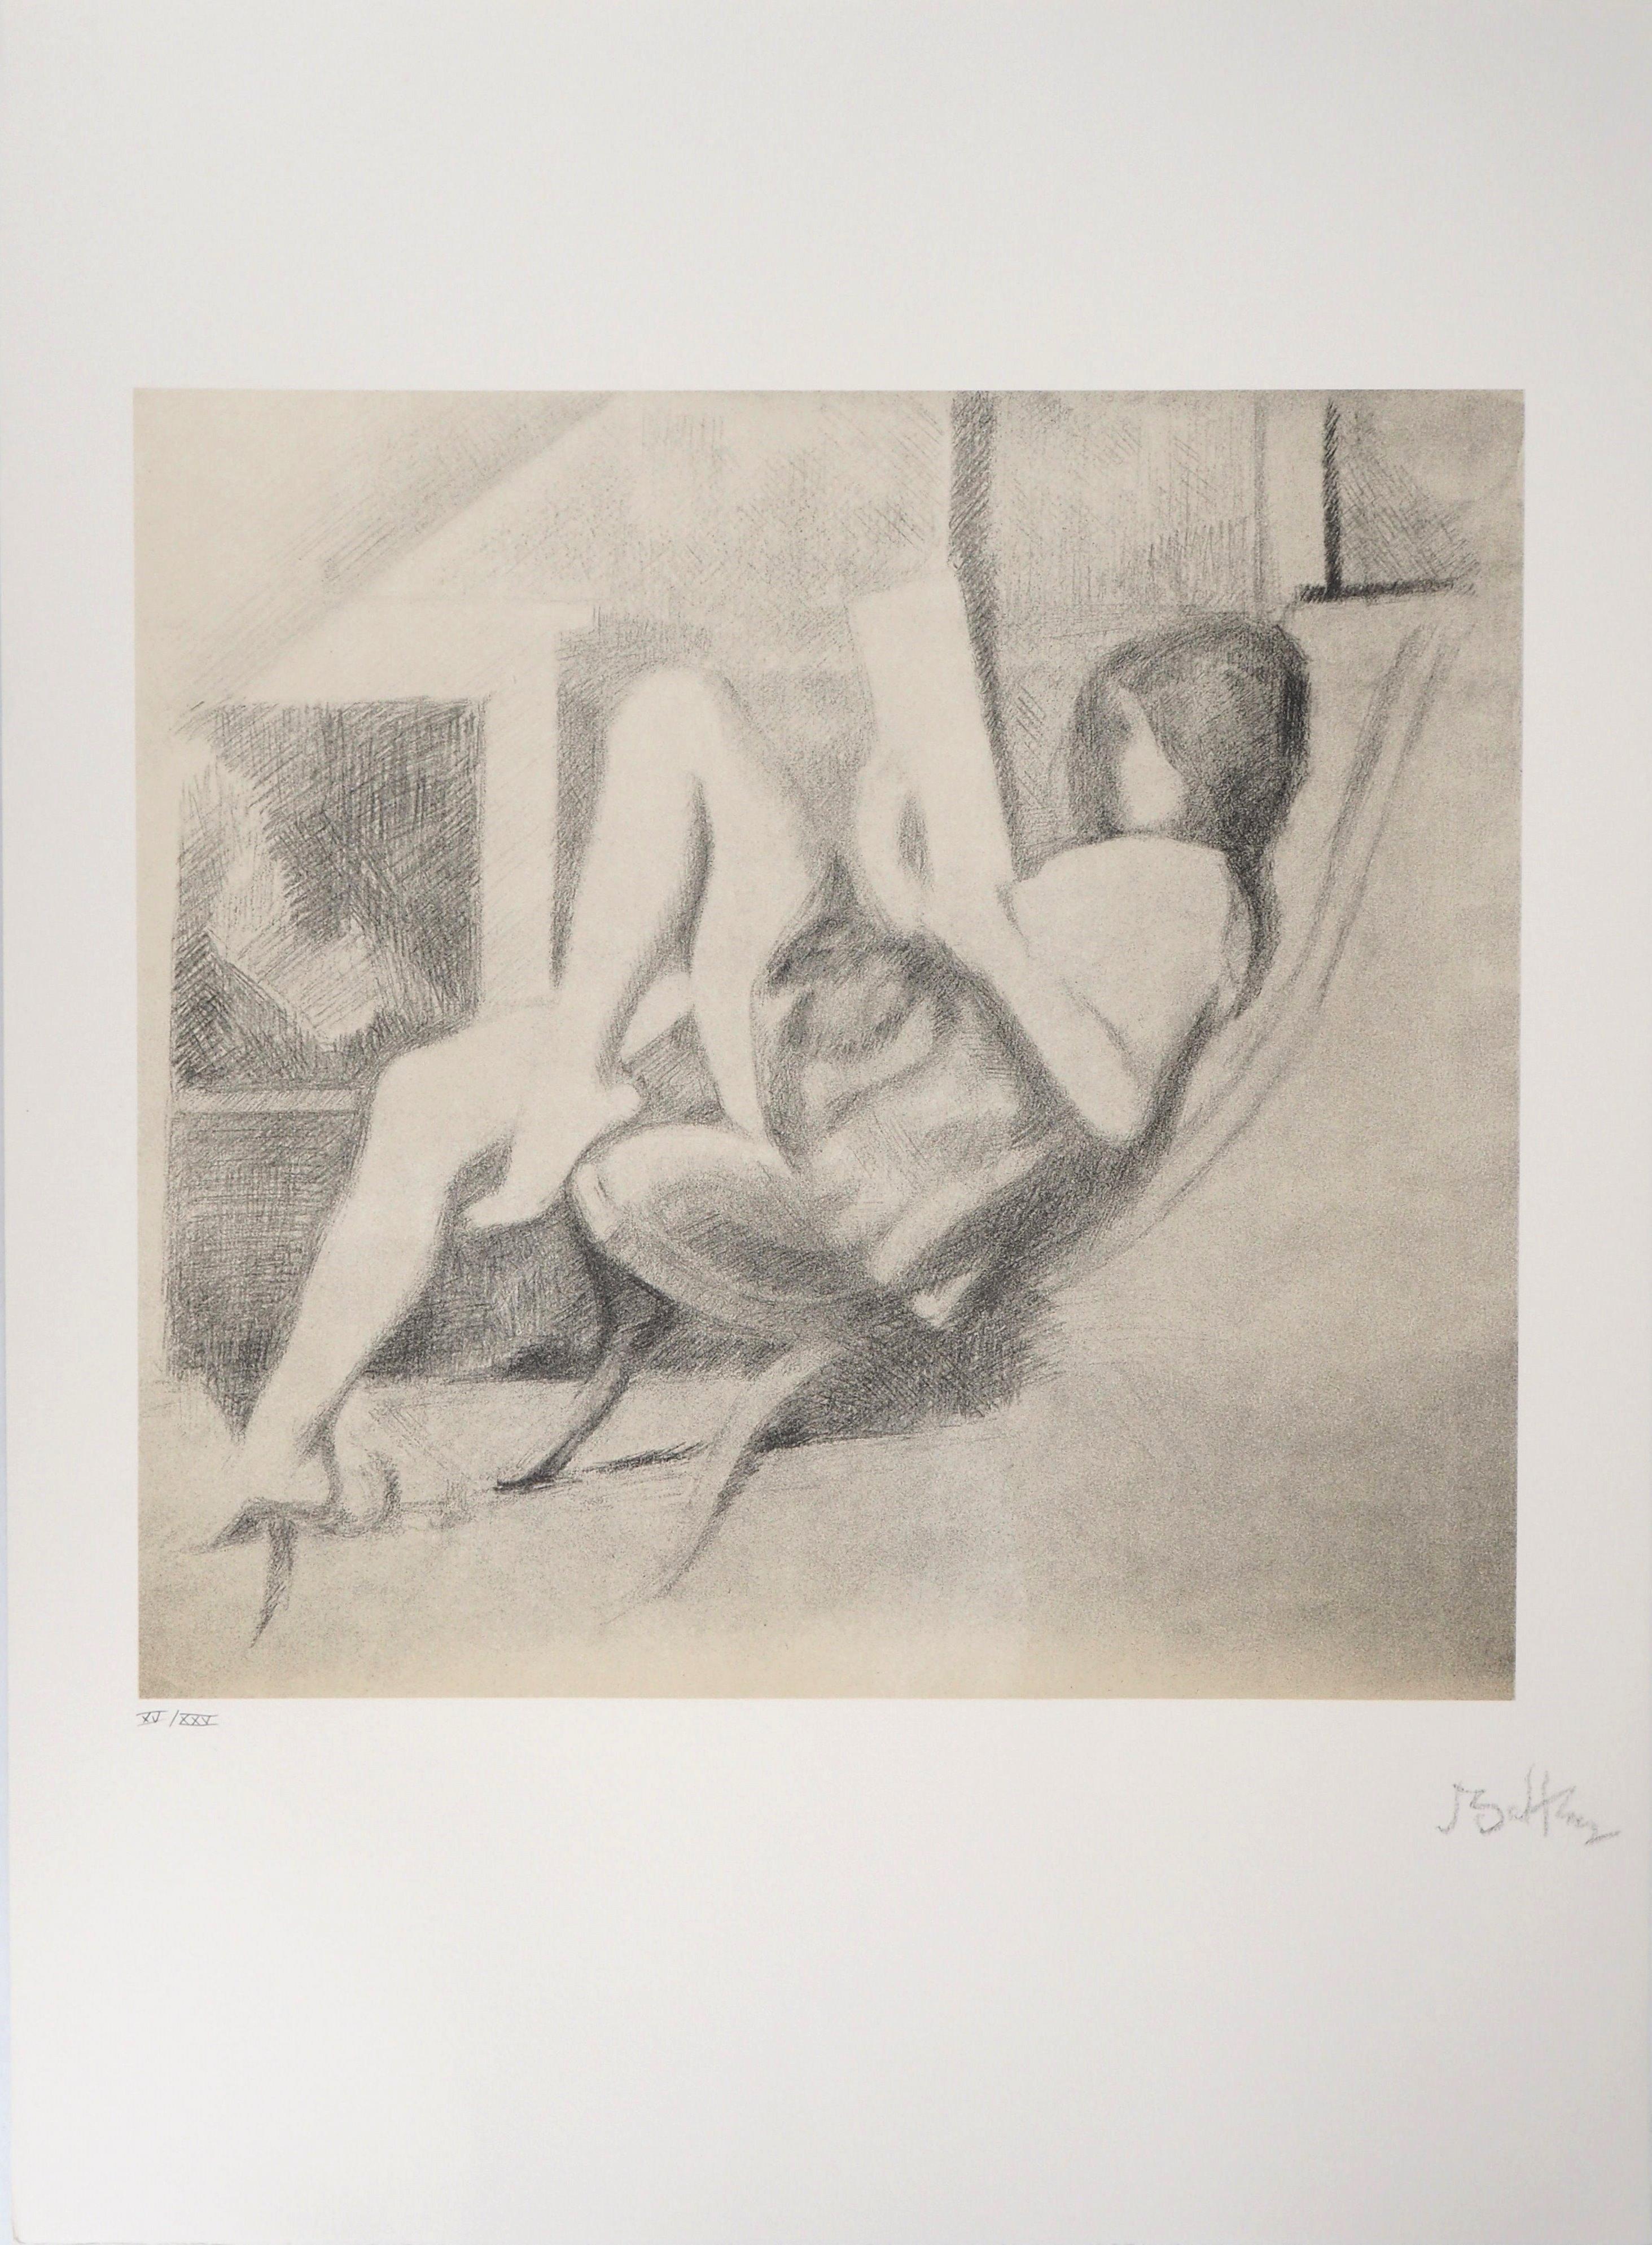 Young Girl Reading - Original handsigned lithograph - Print by Balthus